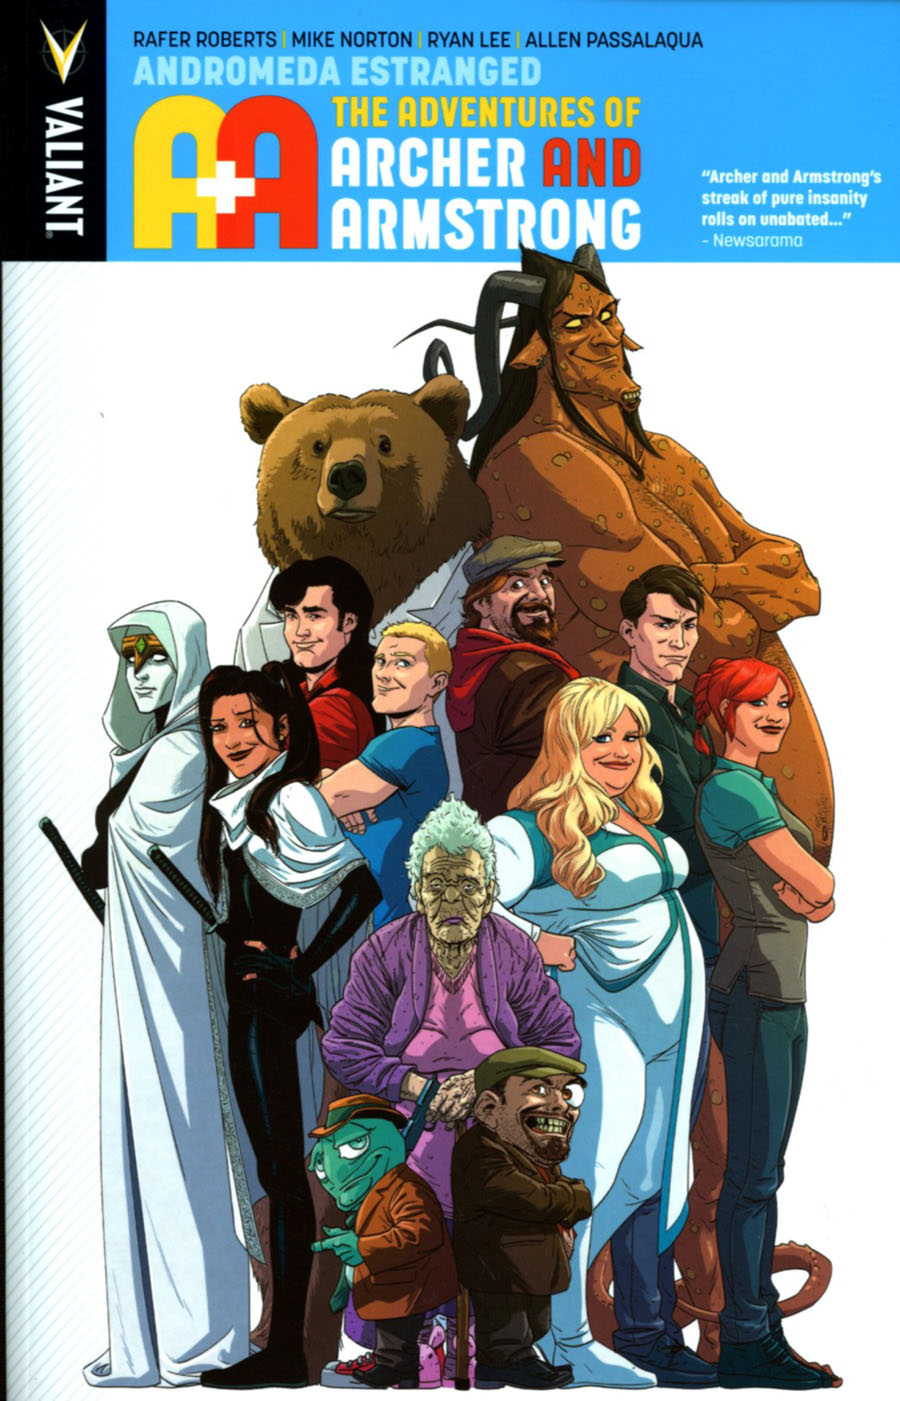 A&A Adventures Of Archer & Armstrong Vol 3 Andromeda Estranged TP